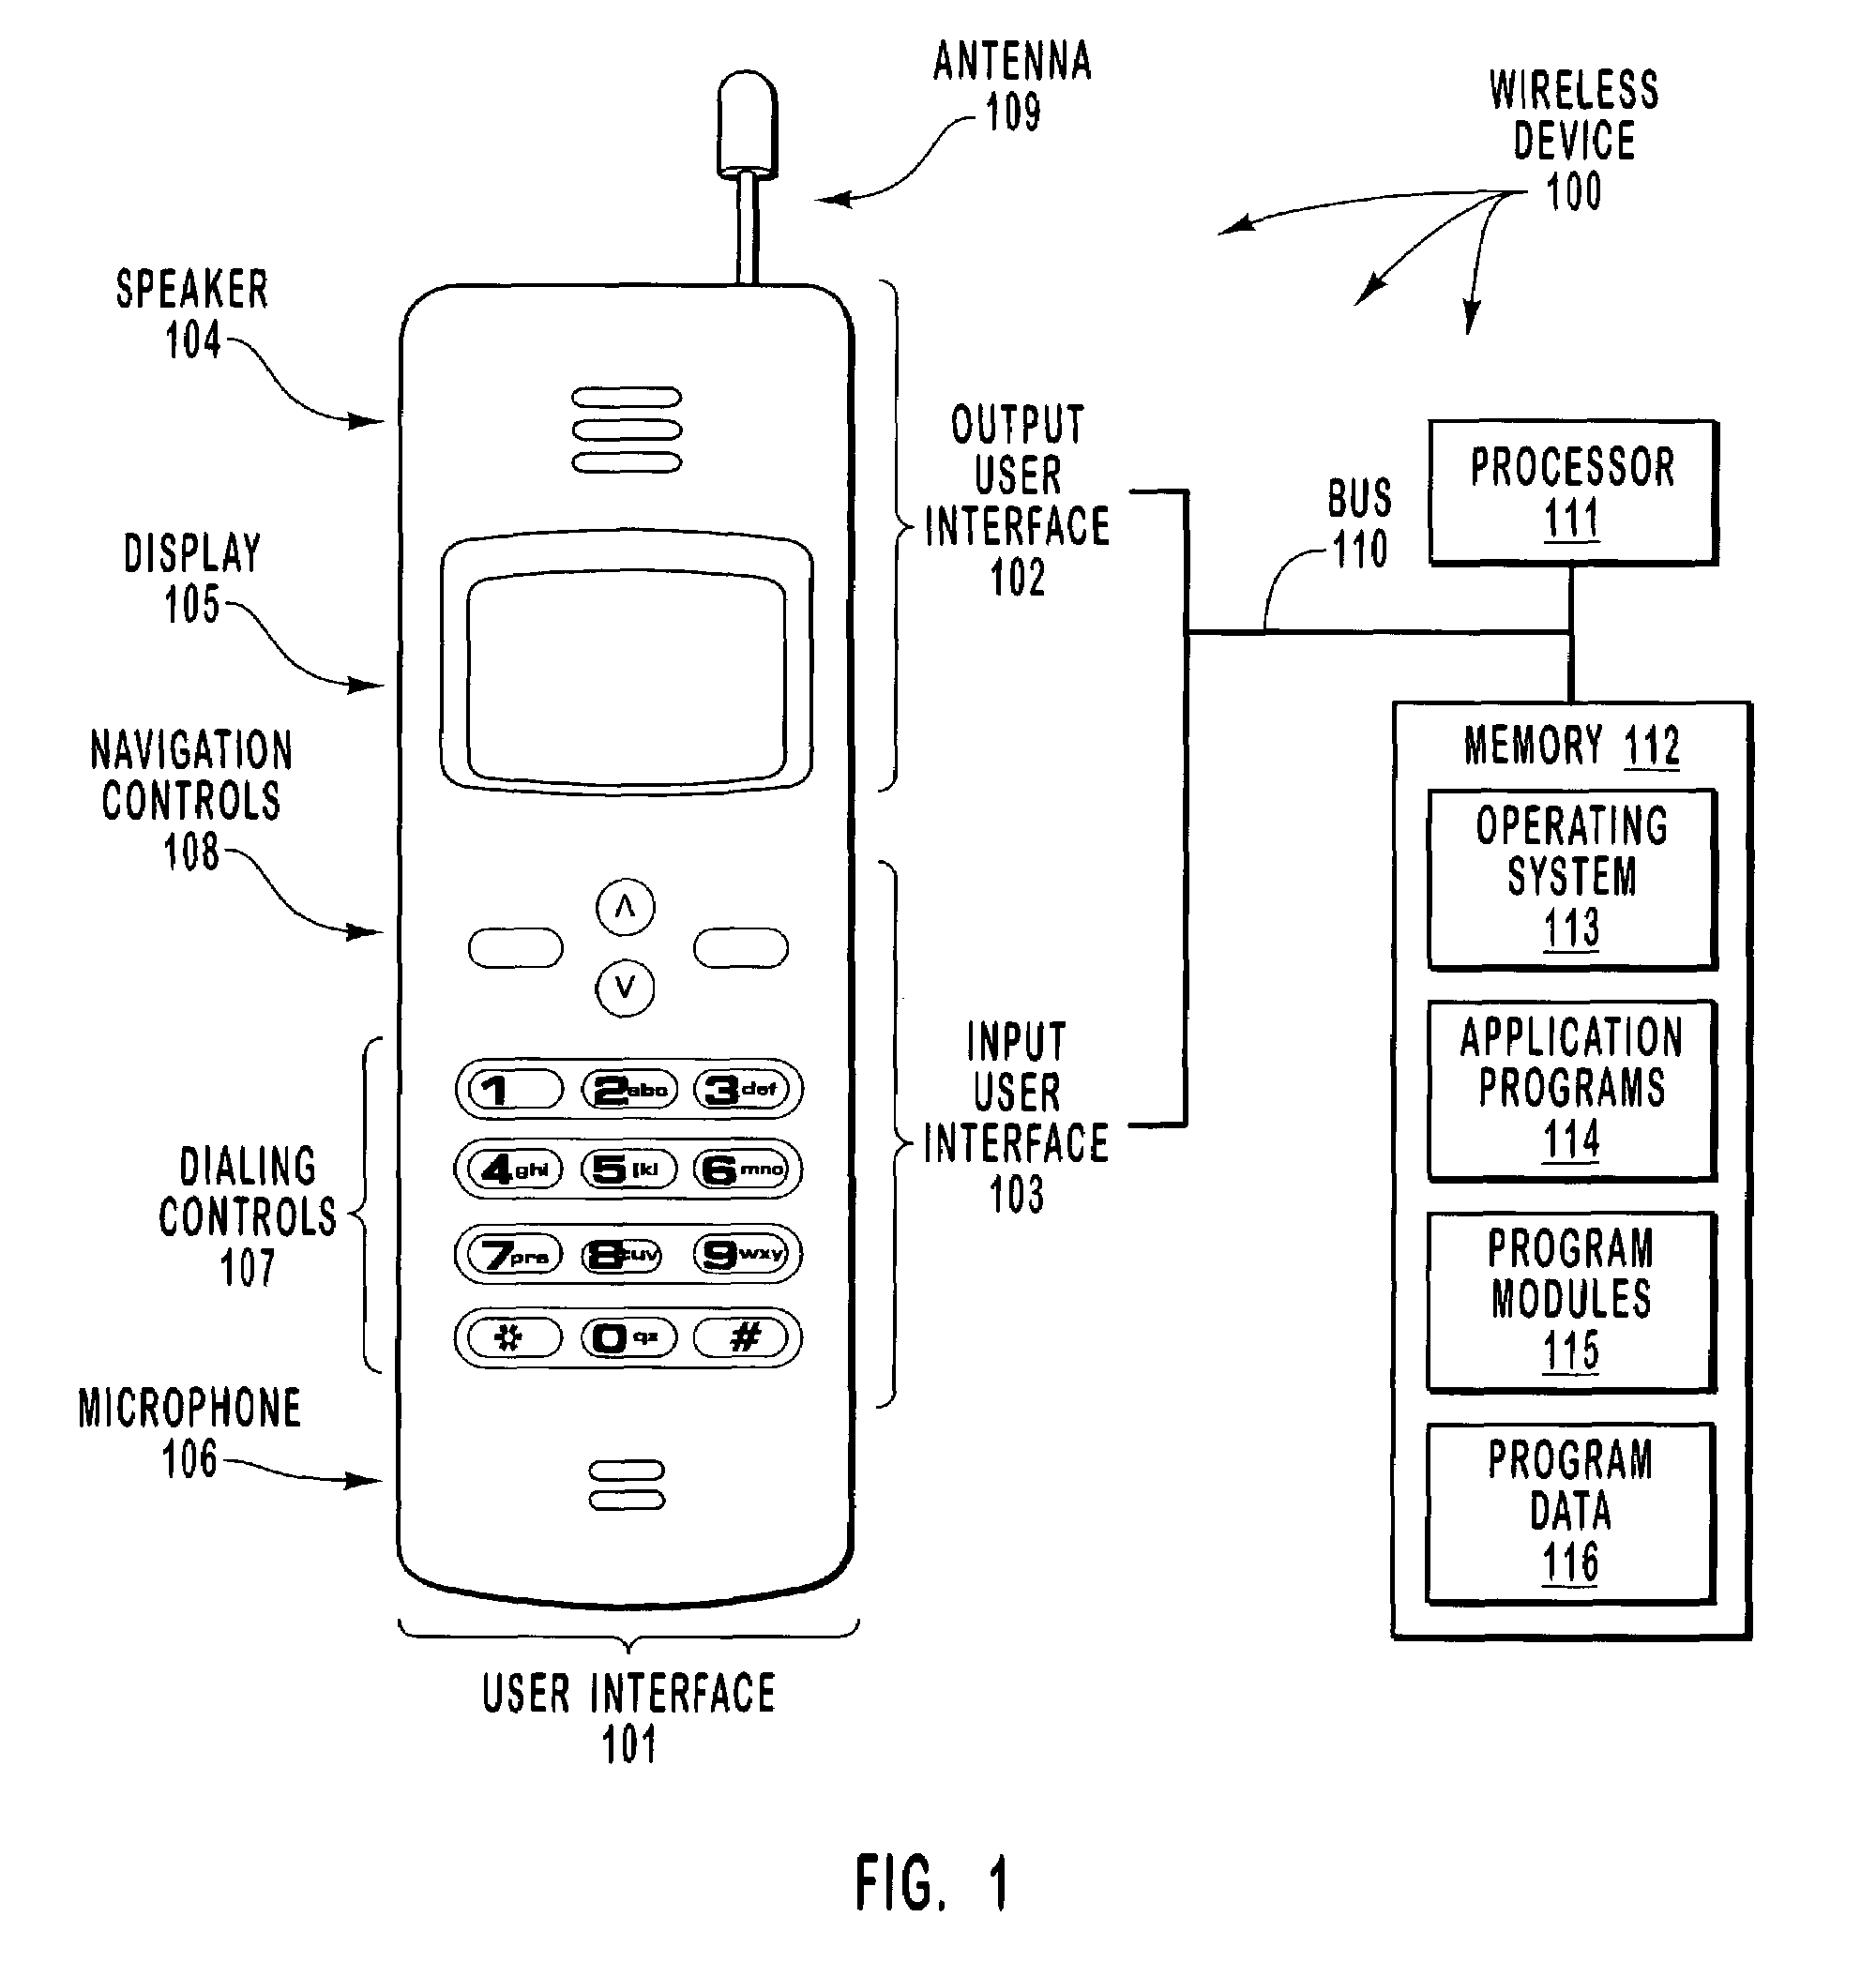 Selective pre-authentication to anticipated primary wireless access points